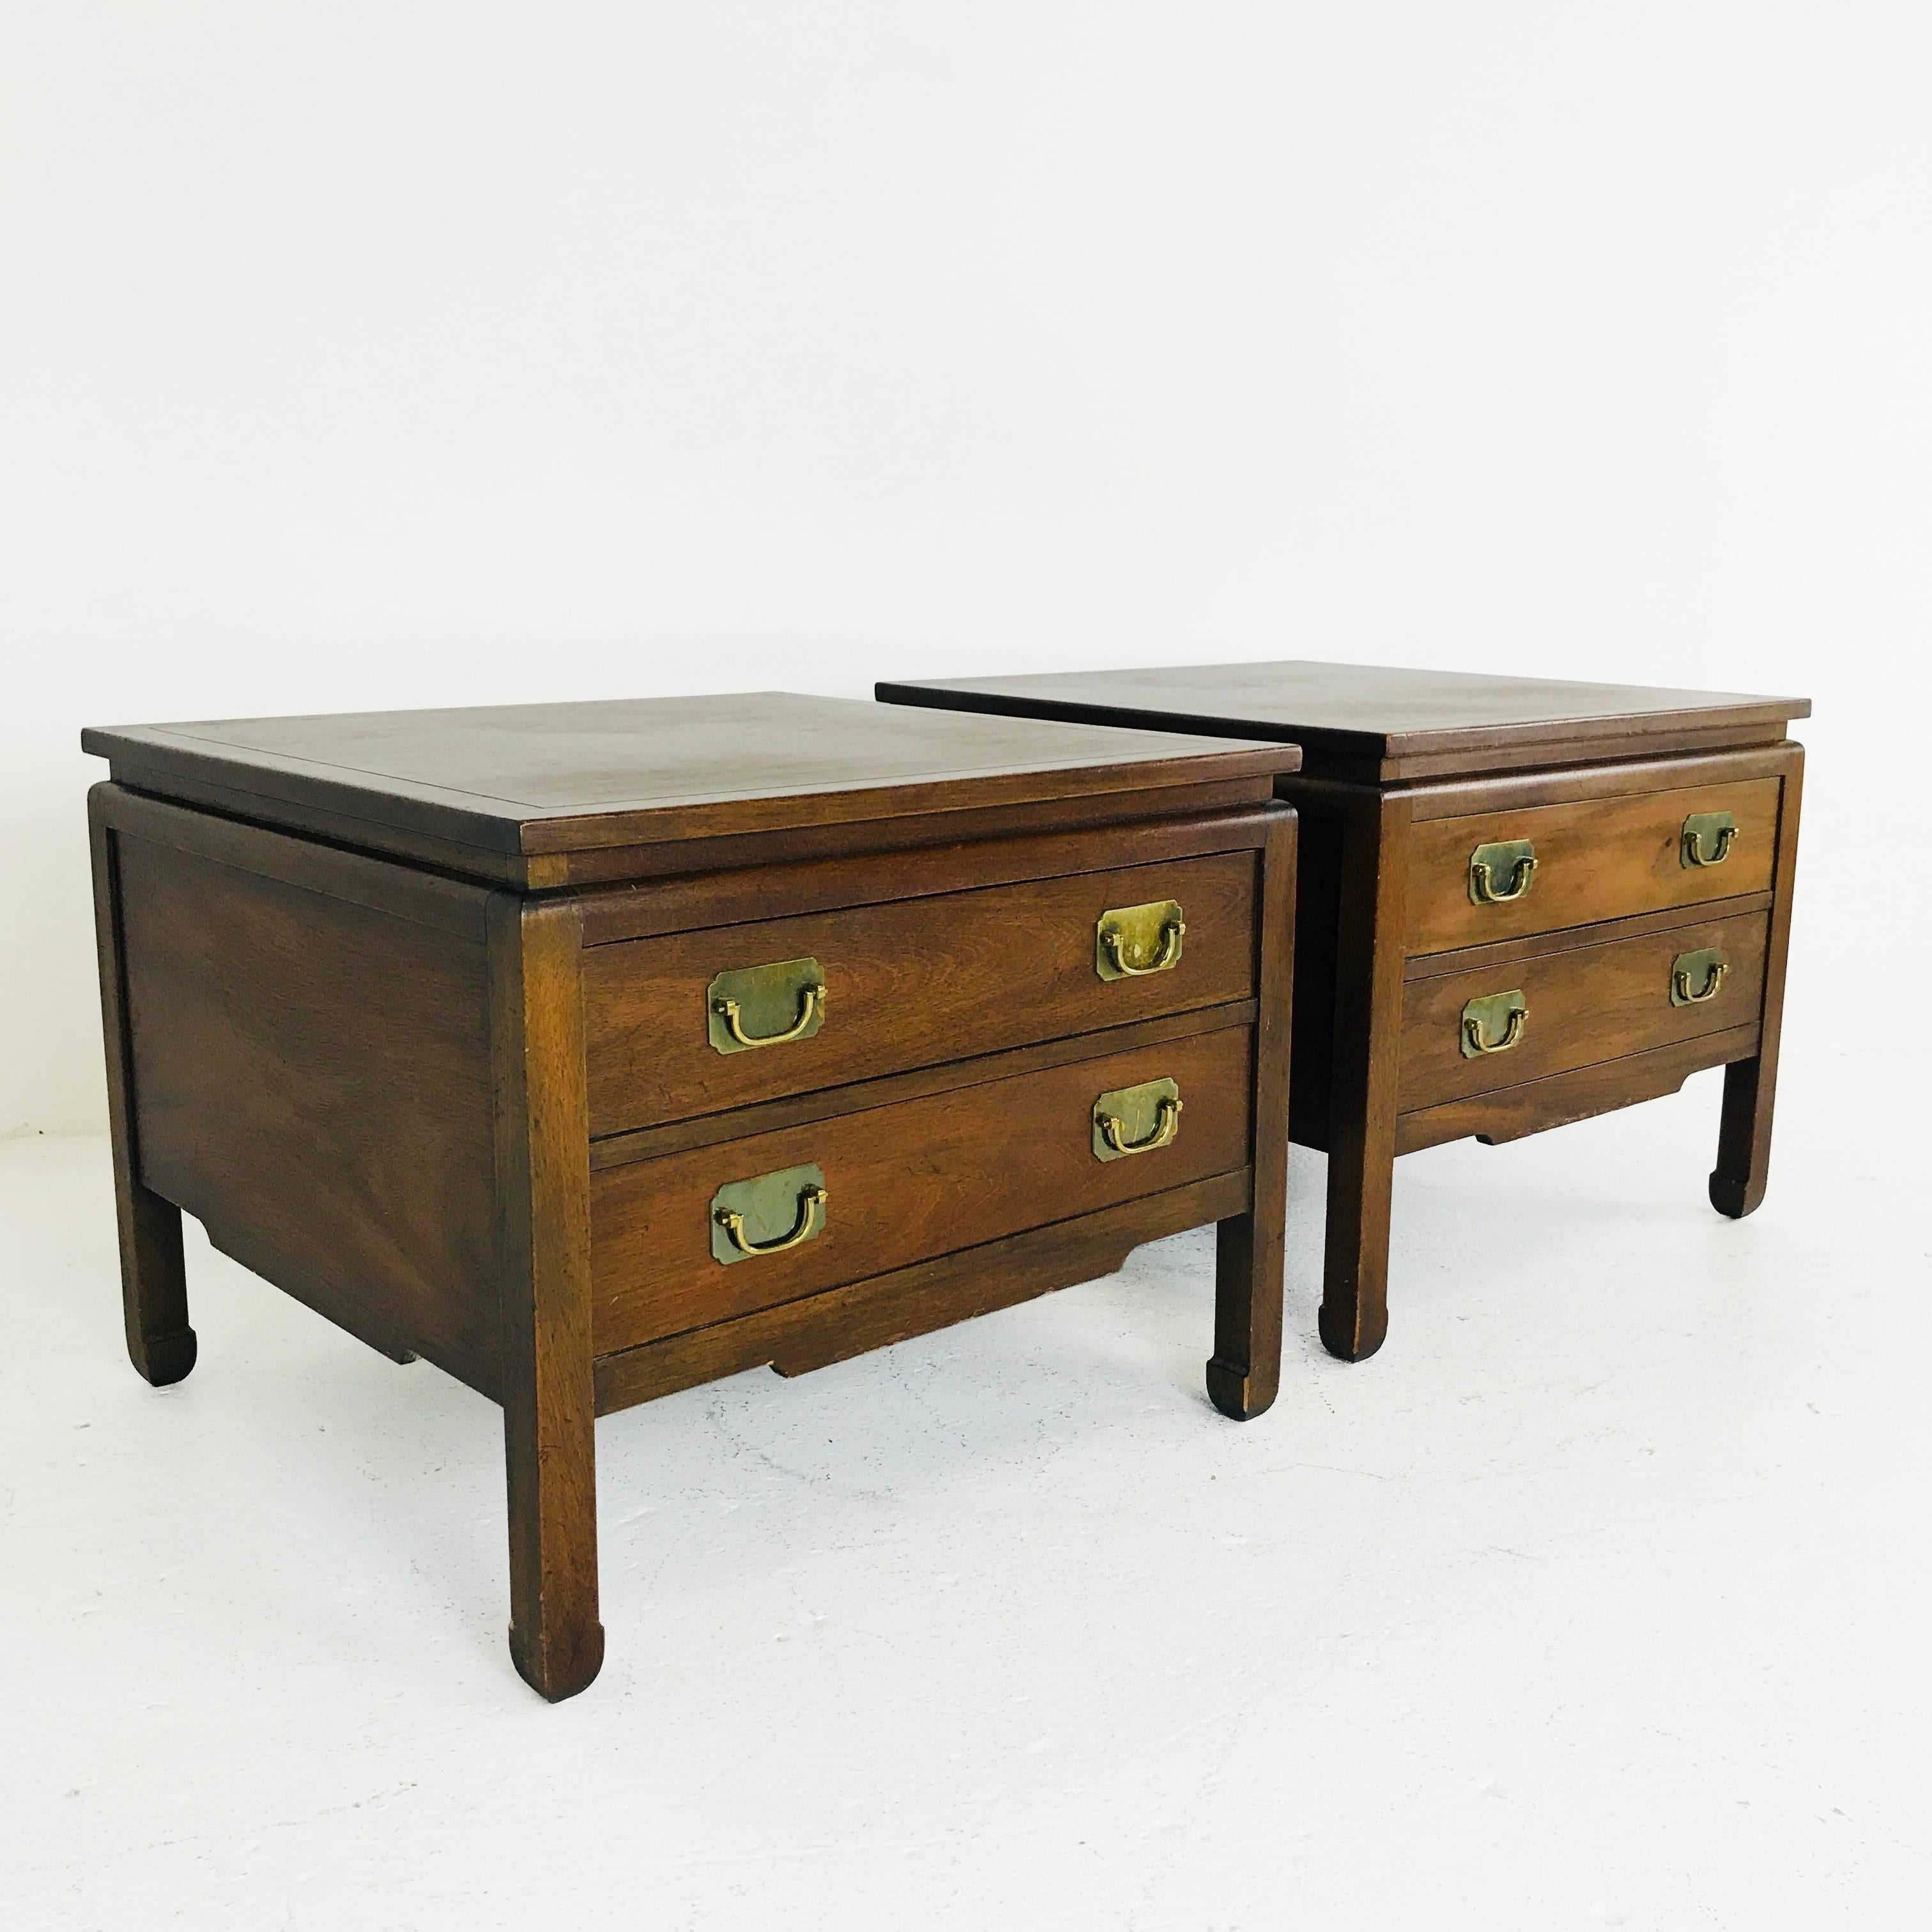 Pair of midcentury end tables by Kittenger. End tables need refinishing.

Dimensions: 28